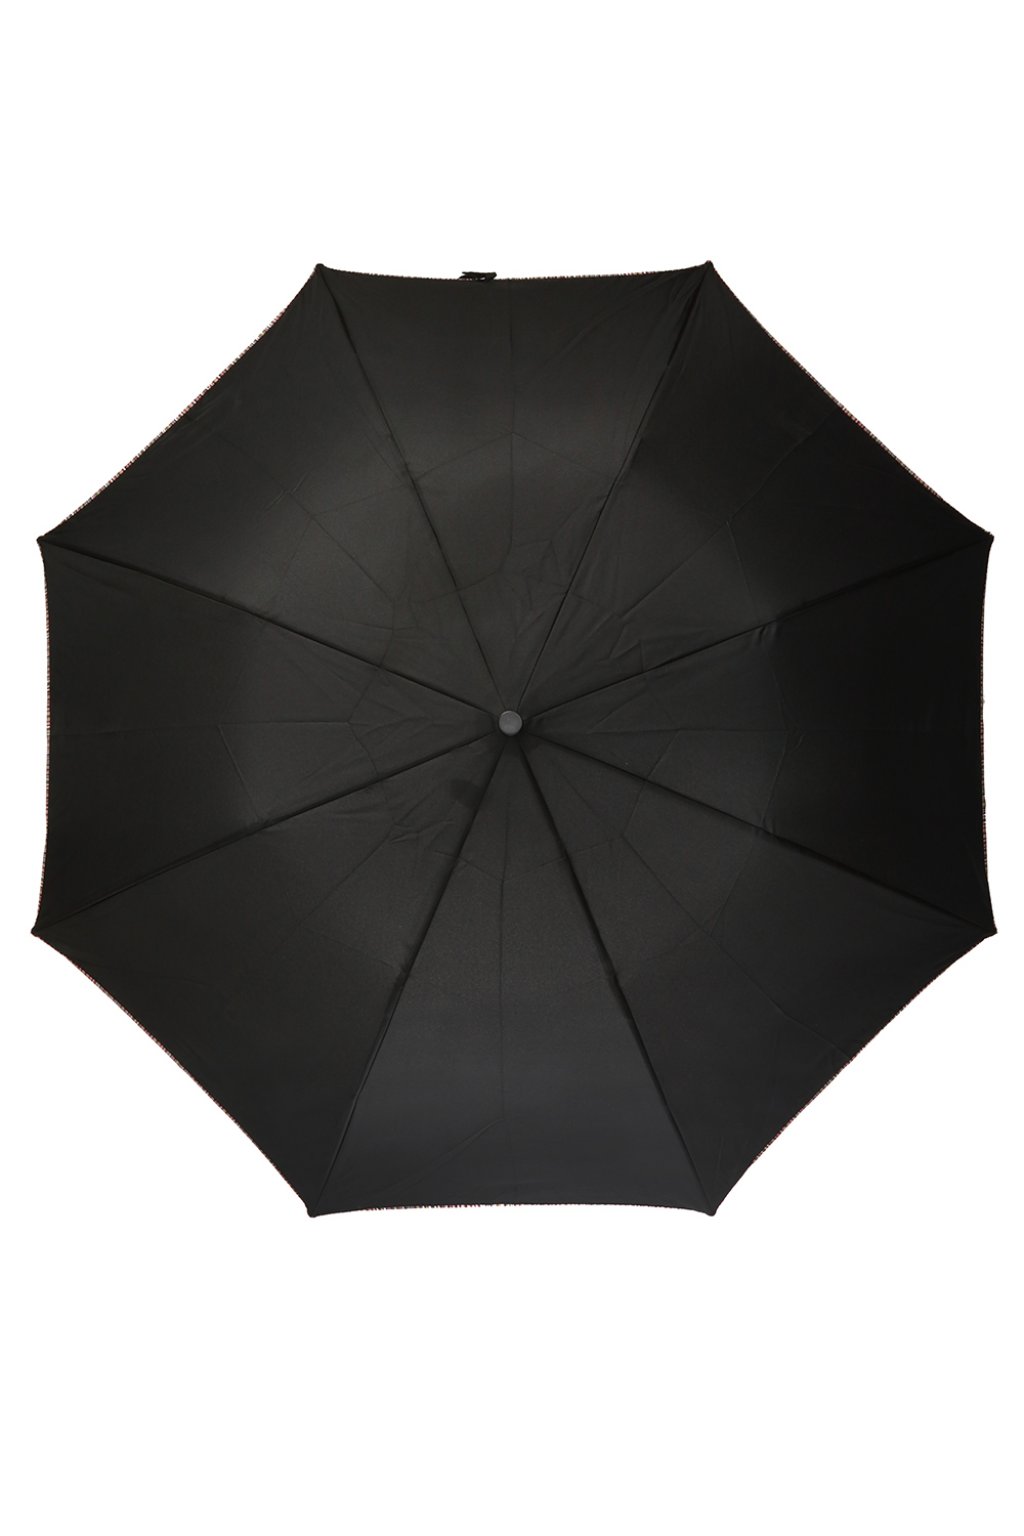 Paul Smith Umbrella with wooden handle